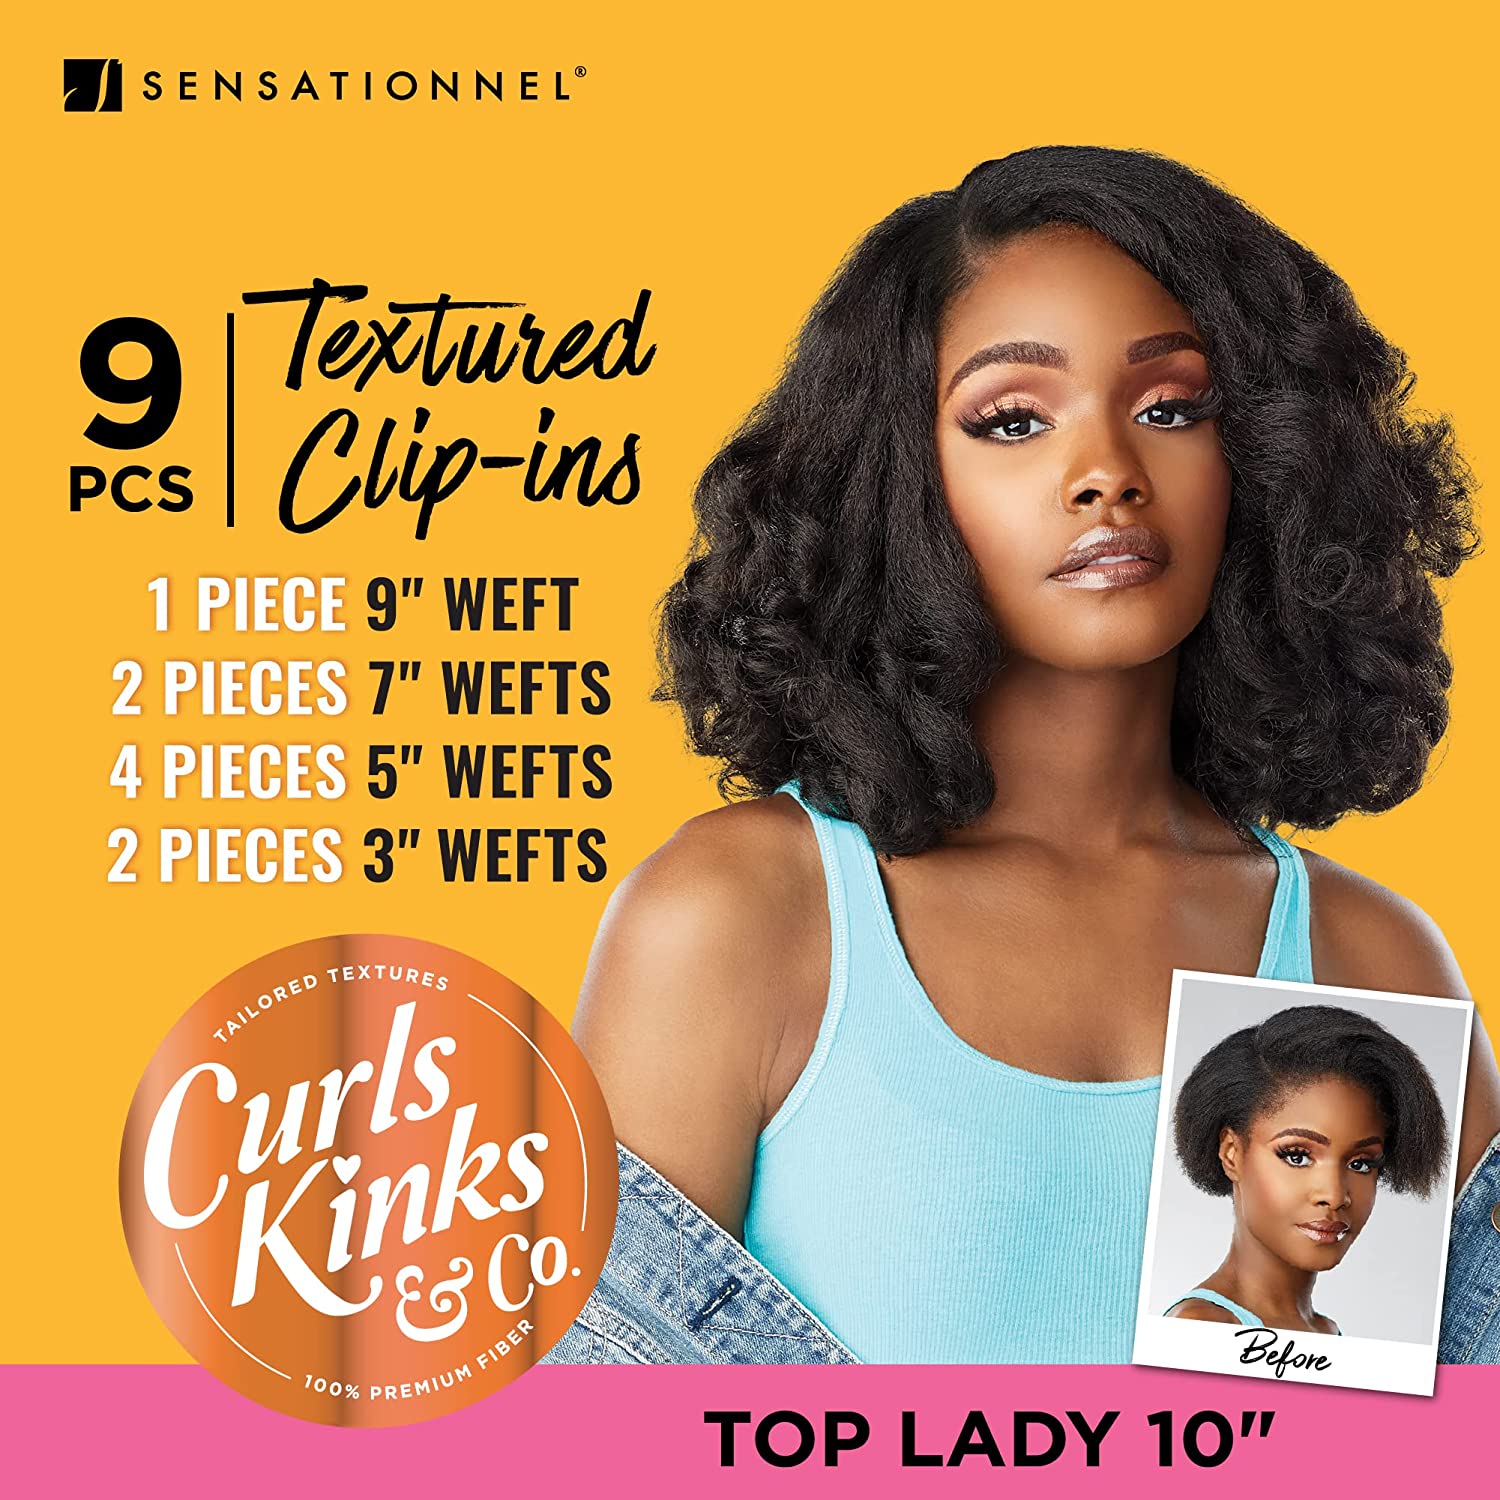 Sensationnel Clip in Top Lady - 10 inch Textured Clip in 9 Piece Pack adds Volume CK&CO Protective Style - Curls Kinks & Co (1B) Find Your New Look Today!